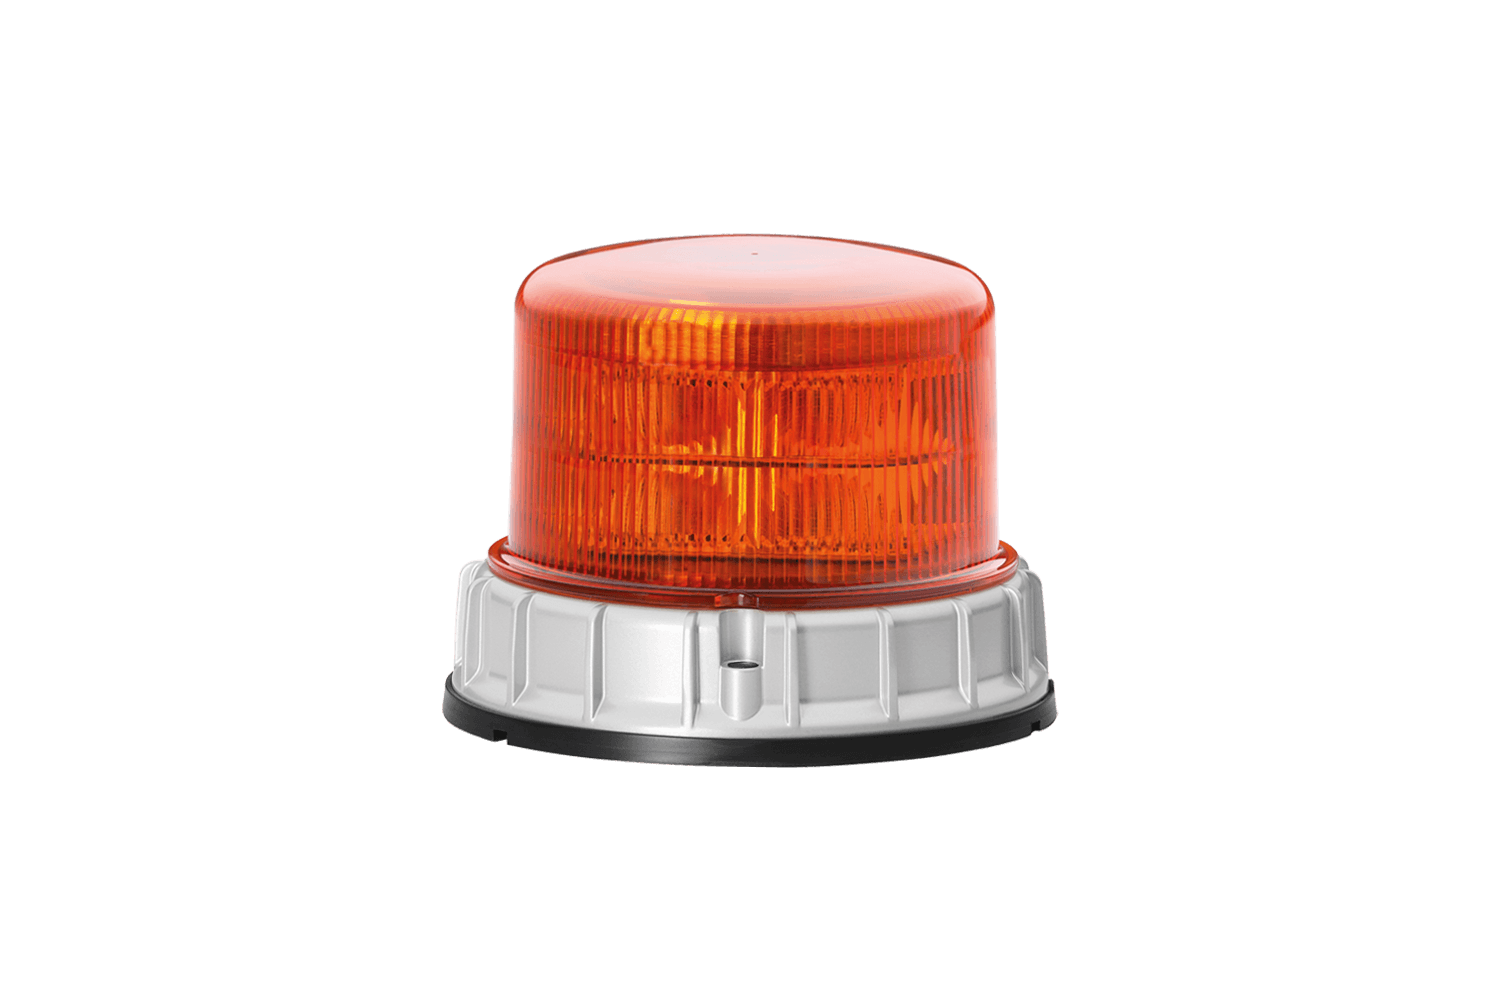 K-LED 1.2 beacon warning lamp from Hella offered by Patlon